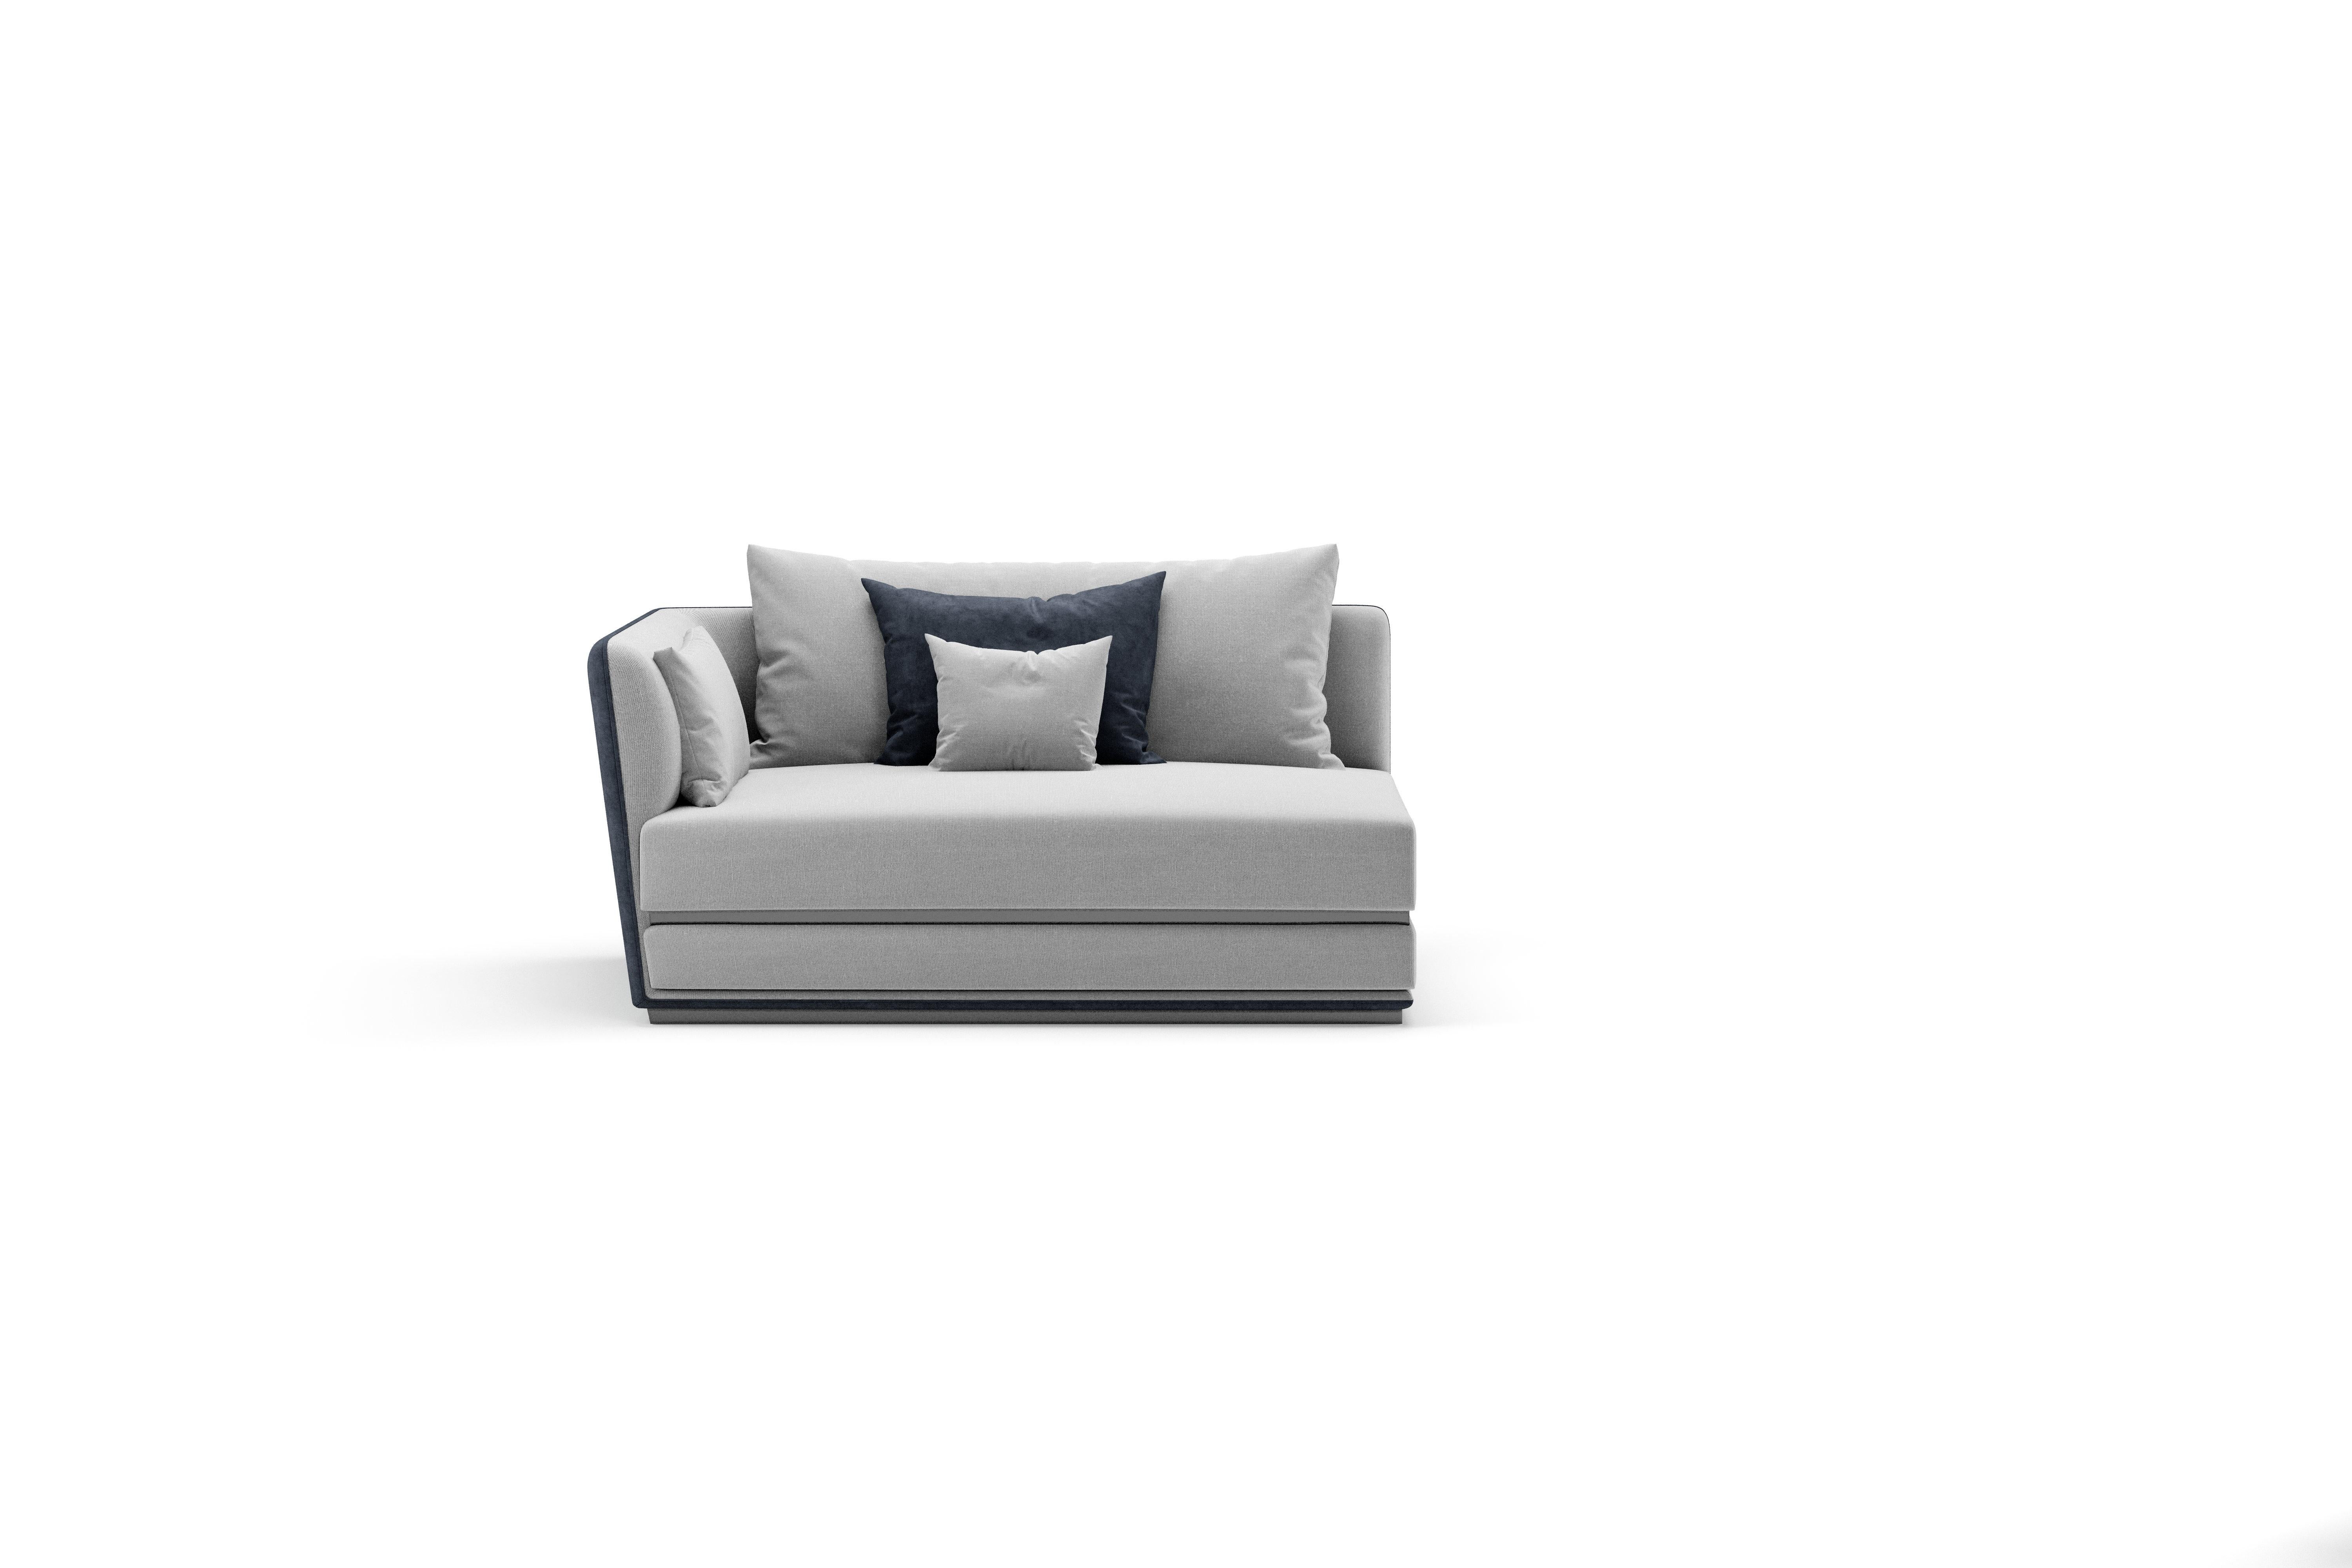 Prisma right/left arm Double element is an element of modular sofa available in many colors and materials. Its structure is wood padded with multi-density rubber and interwoven elastic straps.
The base has titanium nickel finishing.

Prisma is